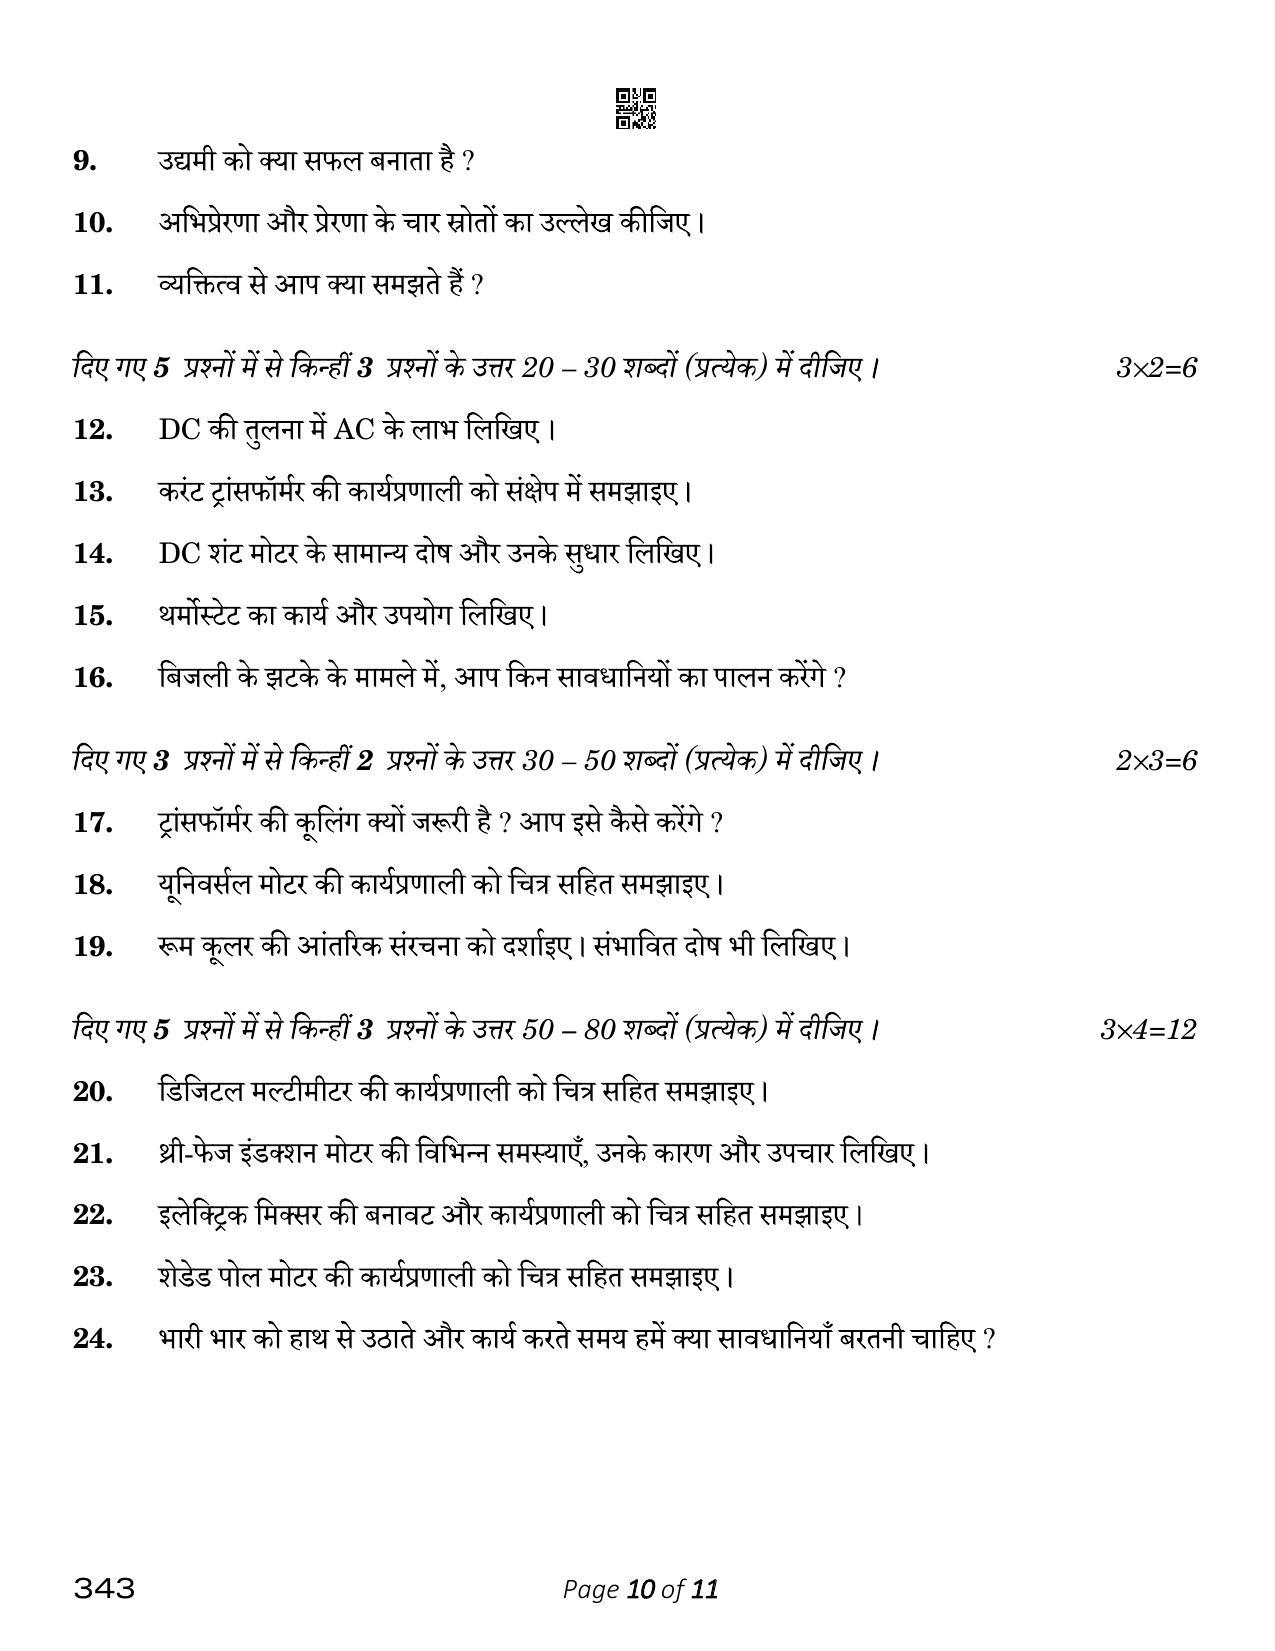 CBSE Class 12 Electrical Technology (Compartment) 2023 Question Paper - Page 10